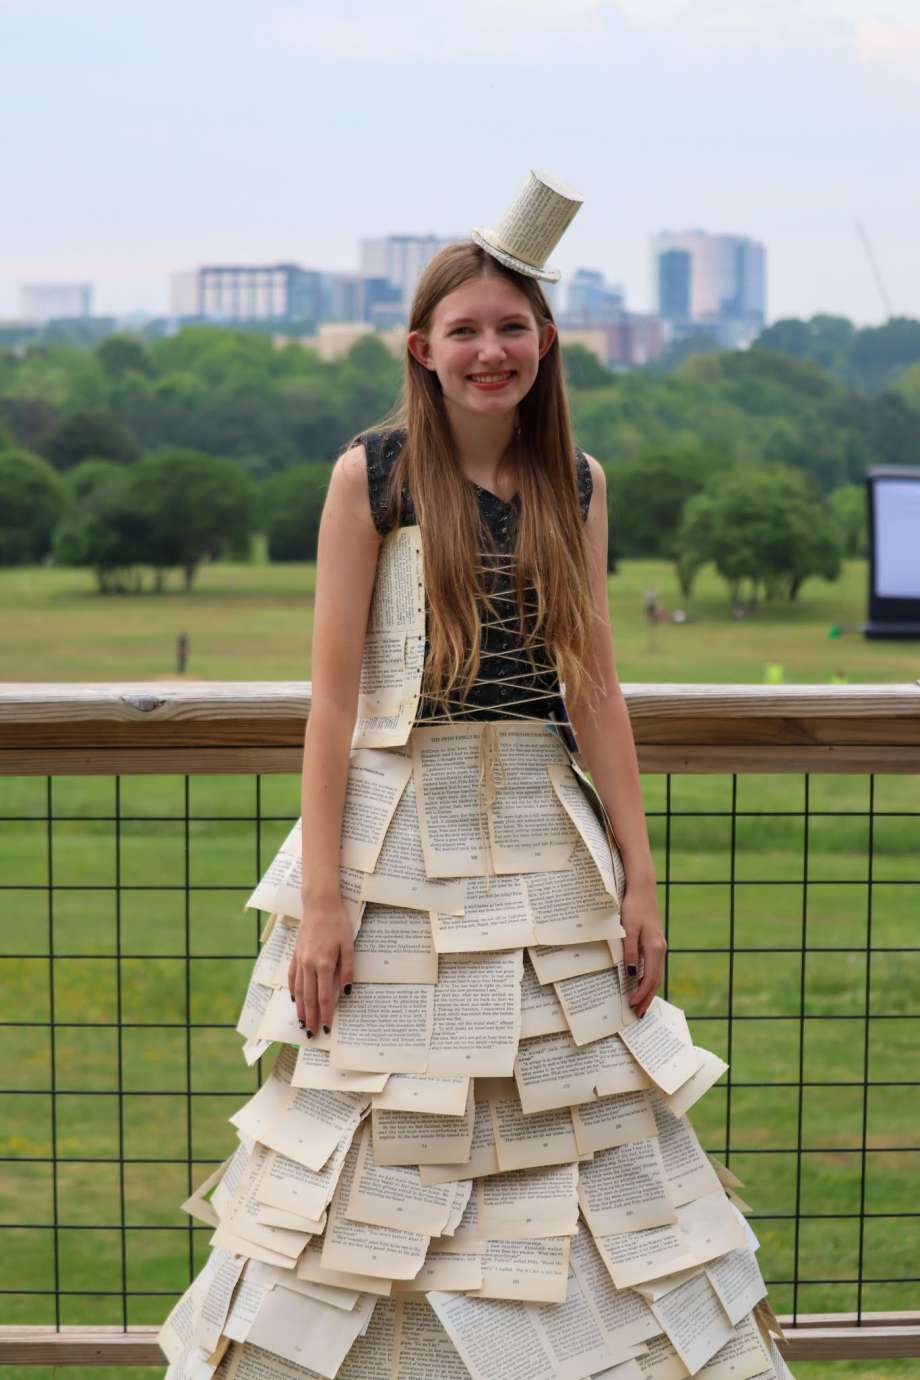 A dress made from pages of a book